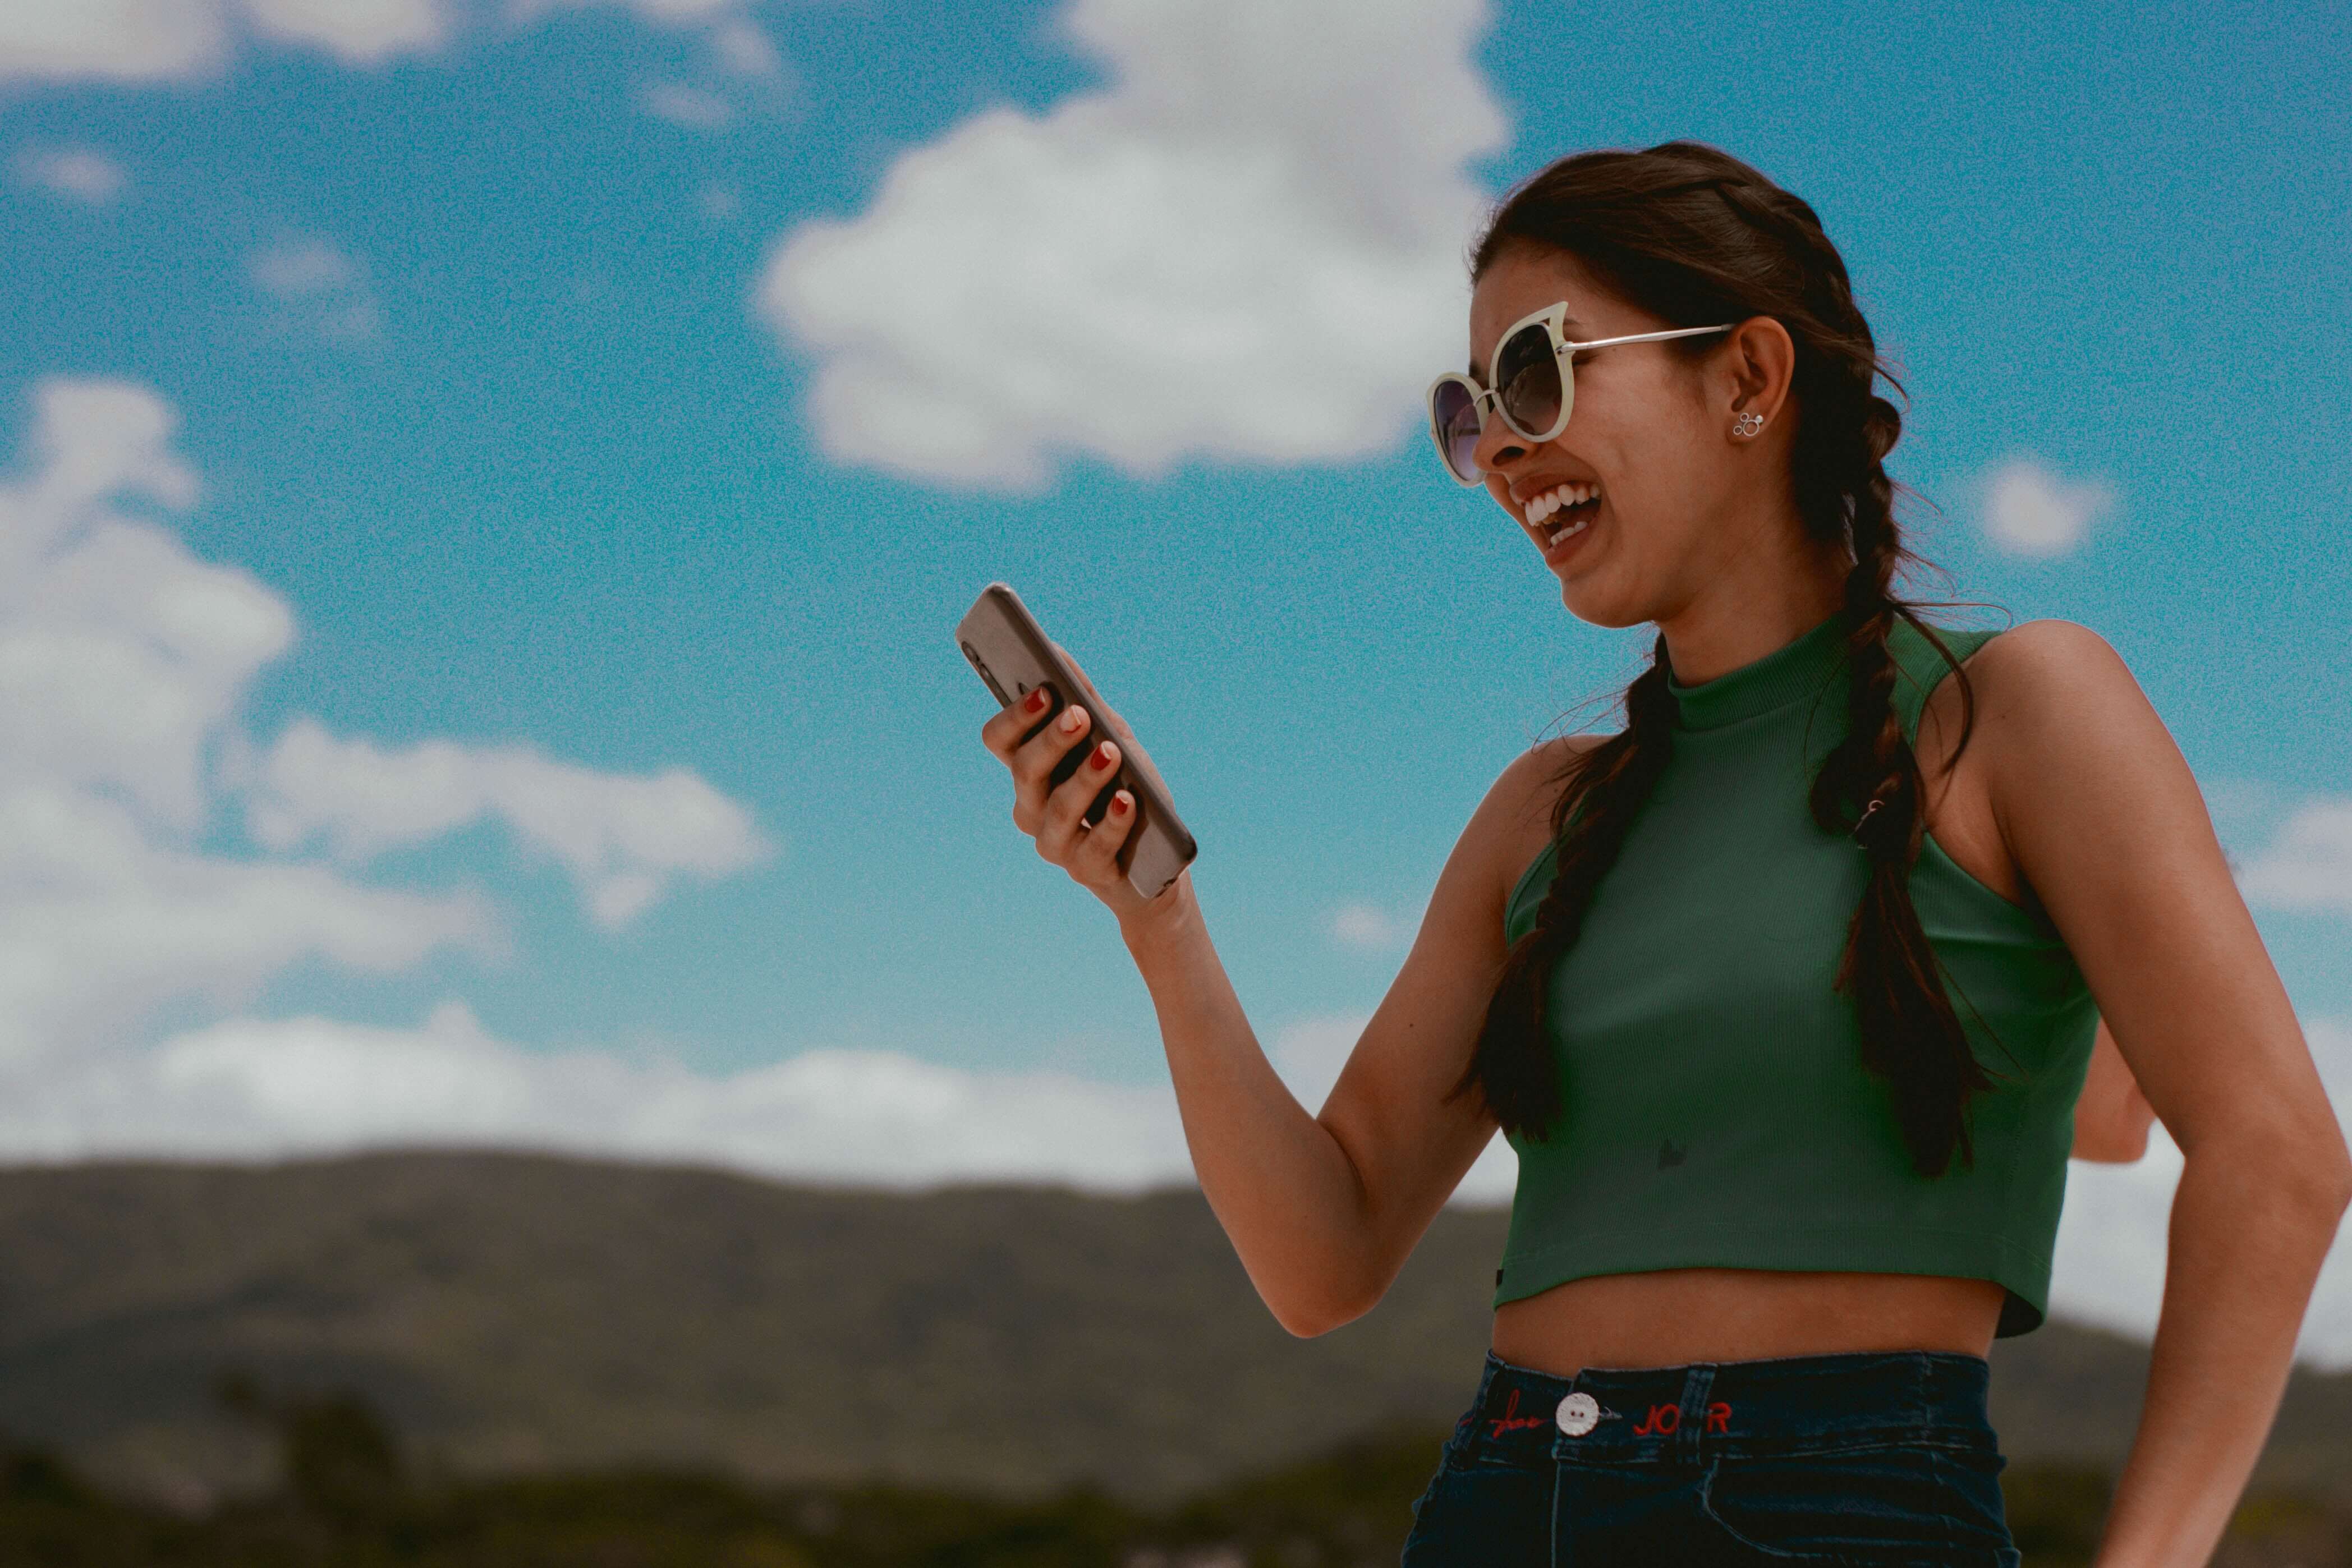 A young ethnically ambiguous woman smiles with an open mouth as she looks at her phone